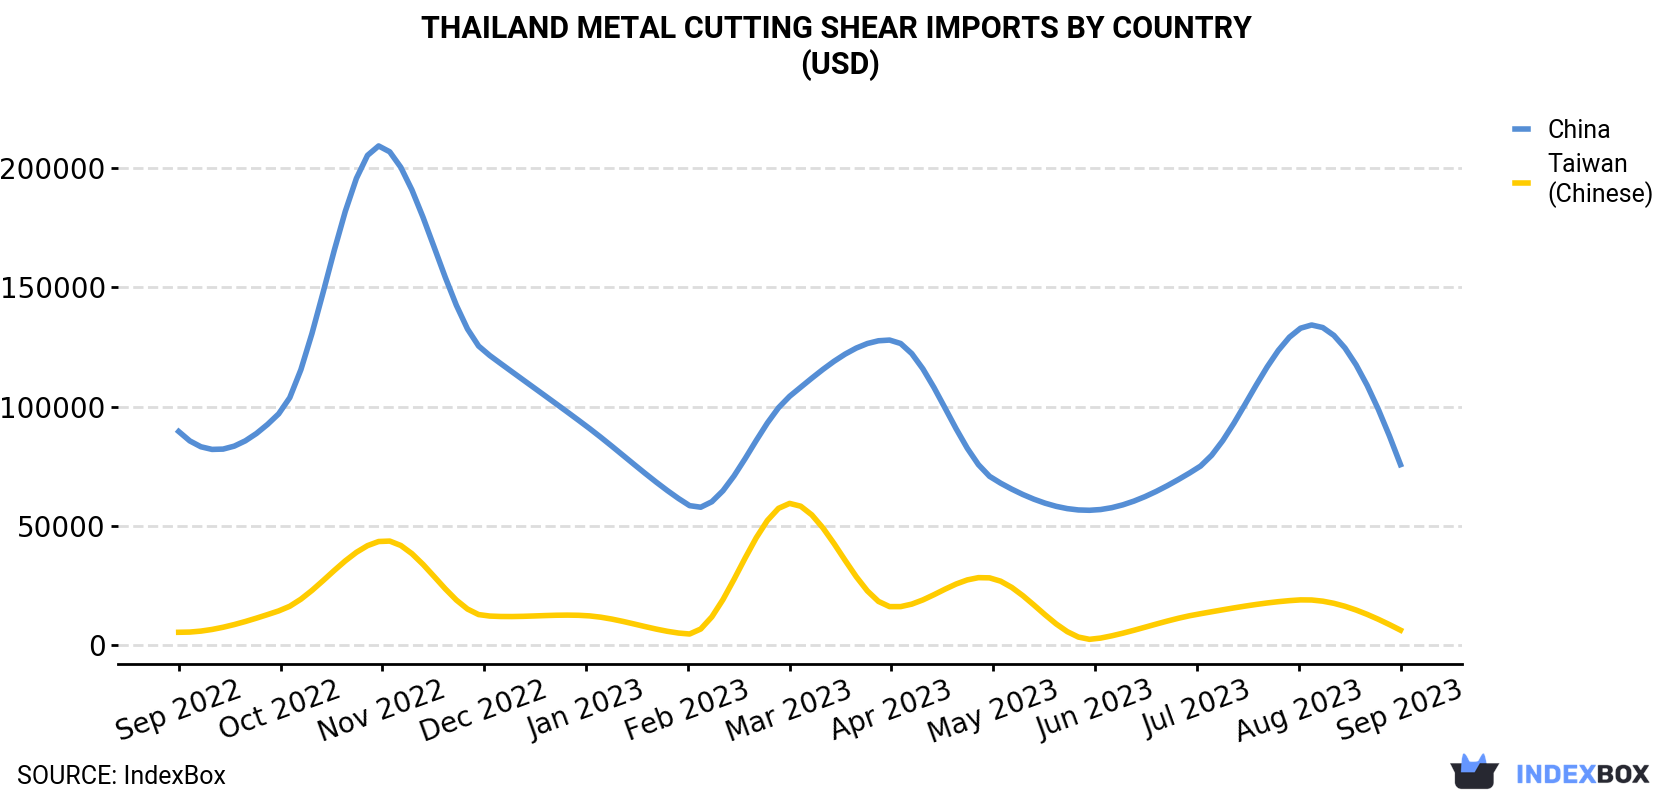 Thailand Metal Cutting Shear Imports By Country (USD)